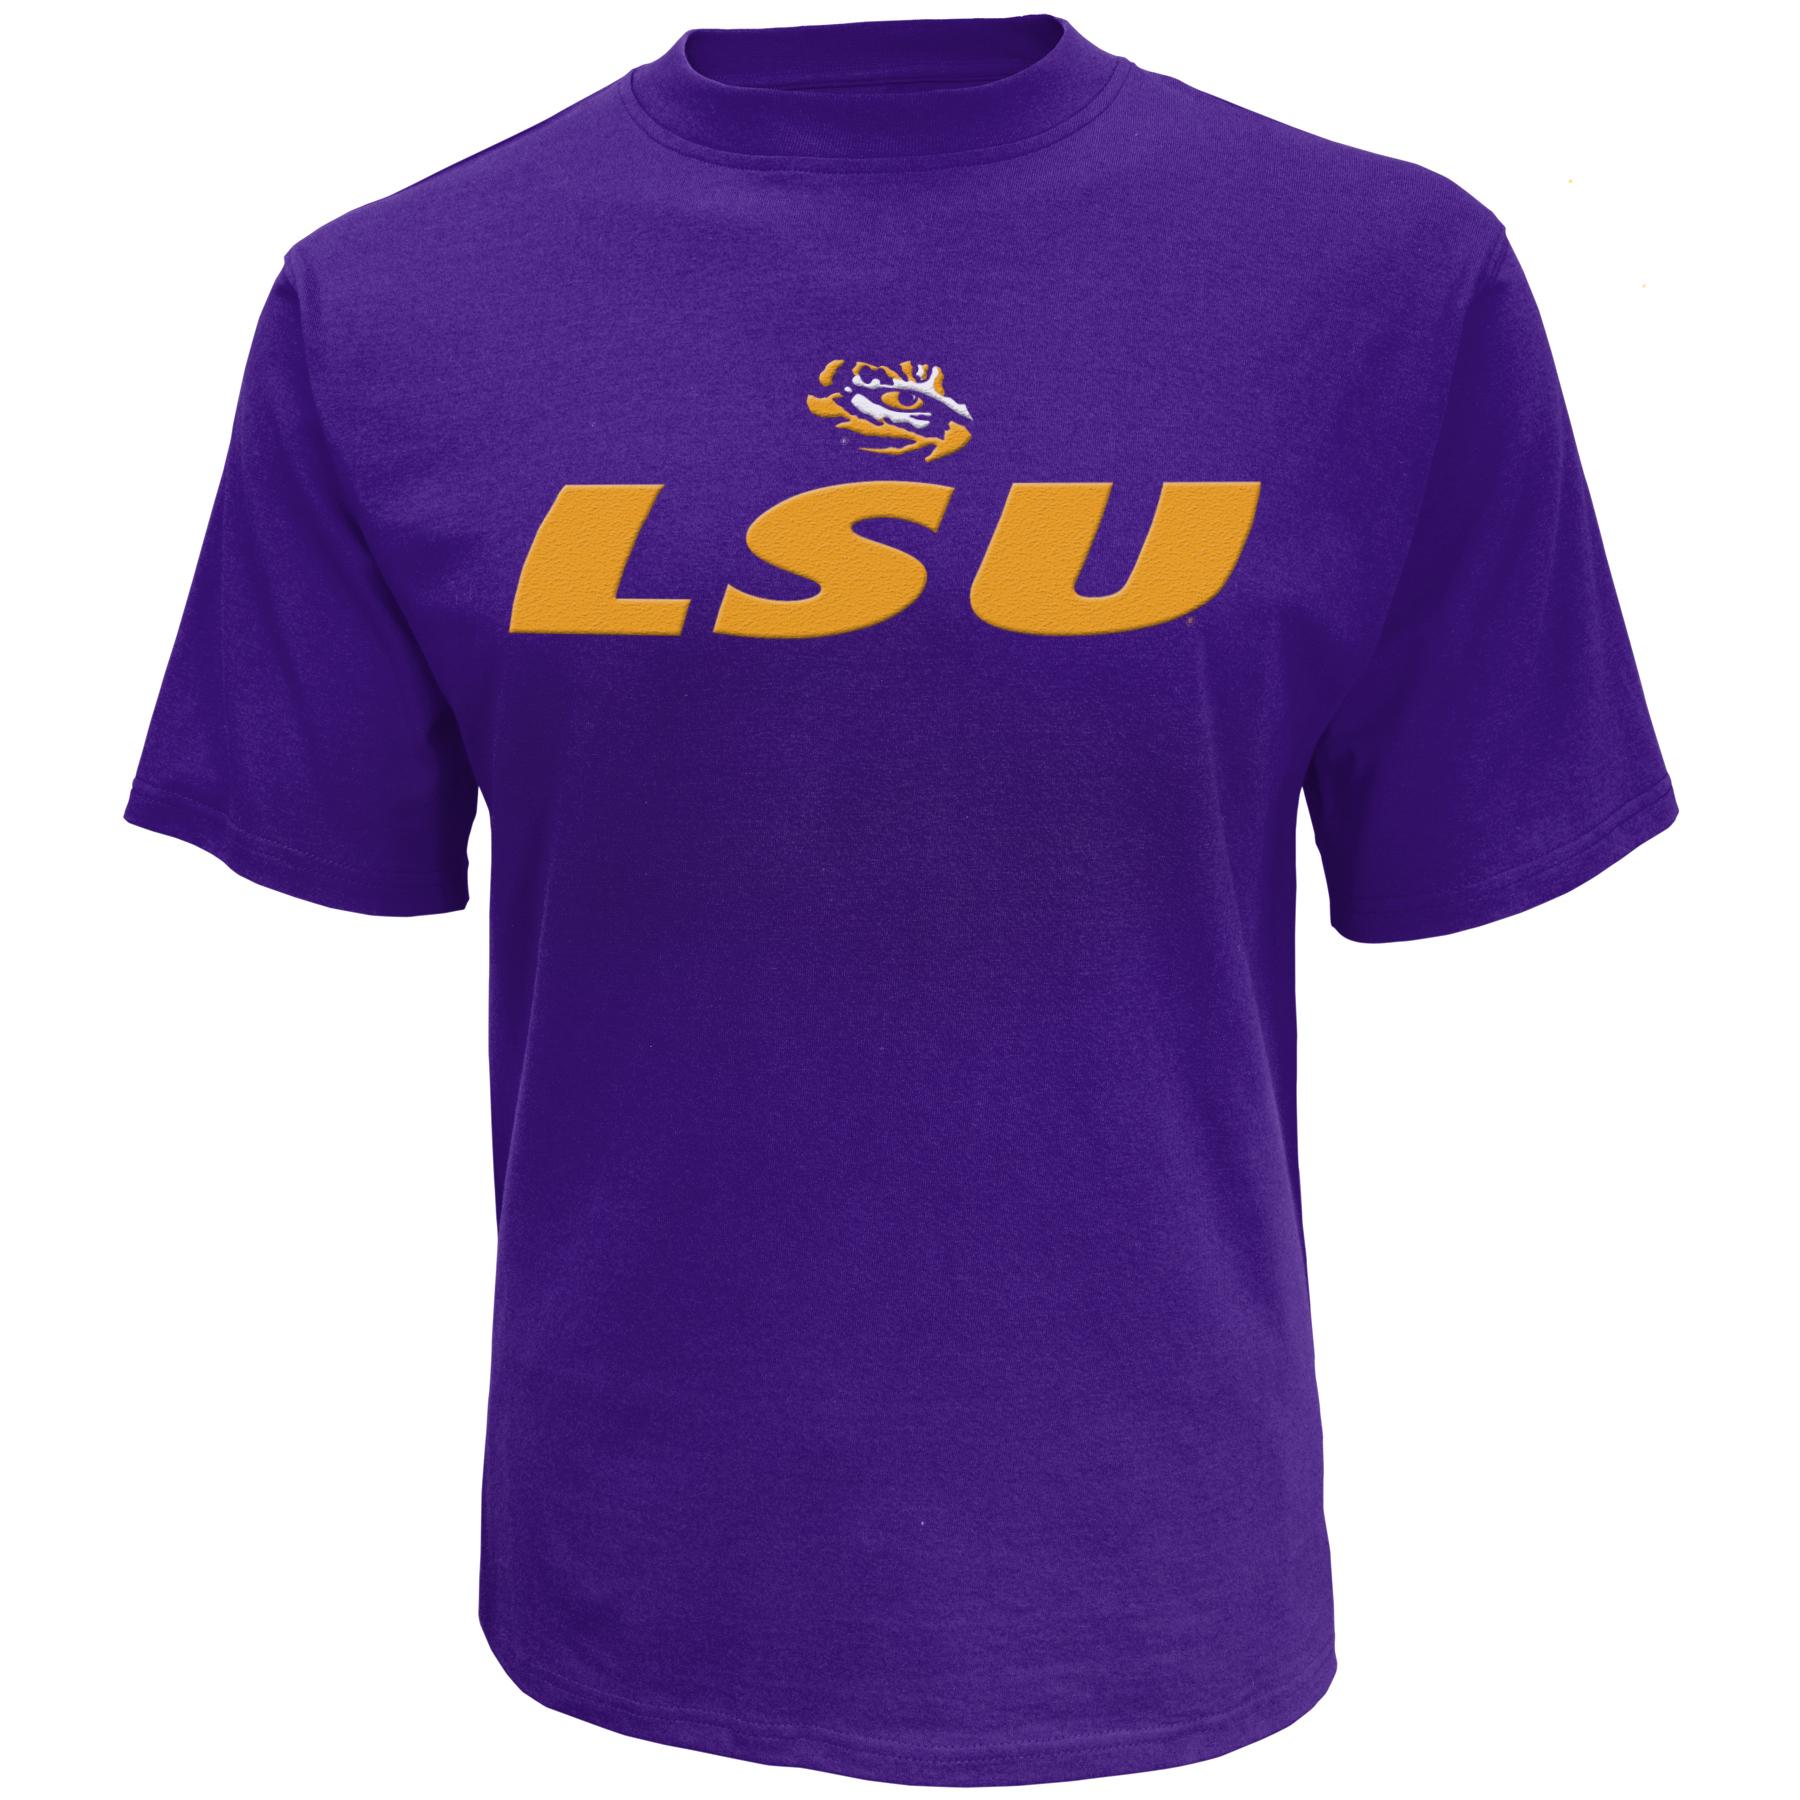 NCAA Men's Embroidered Graphic T-Shirt - Louisiana State Tigers